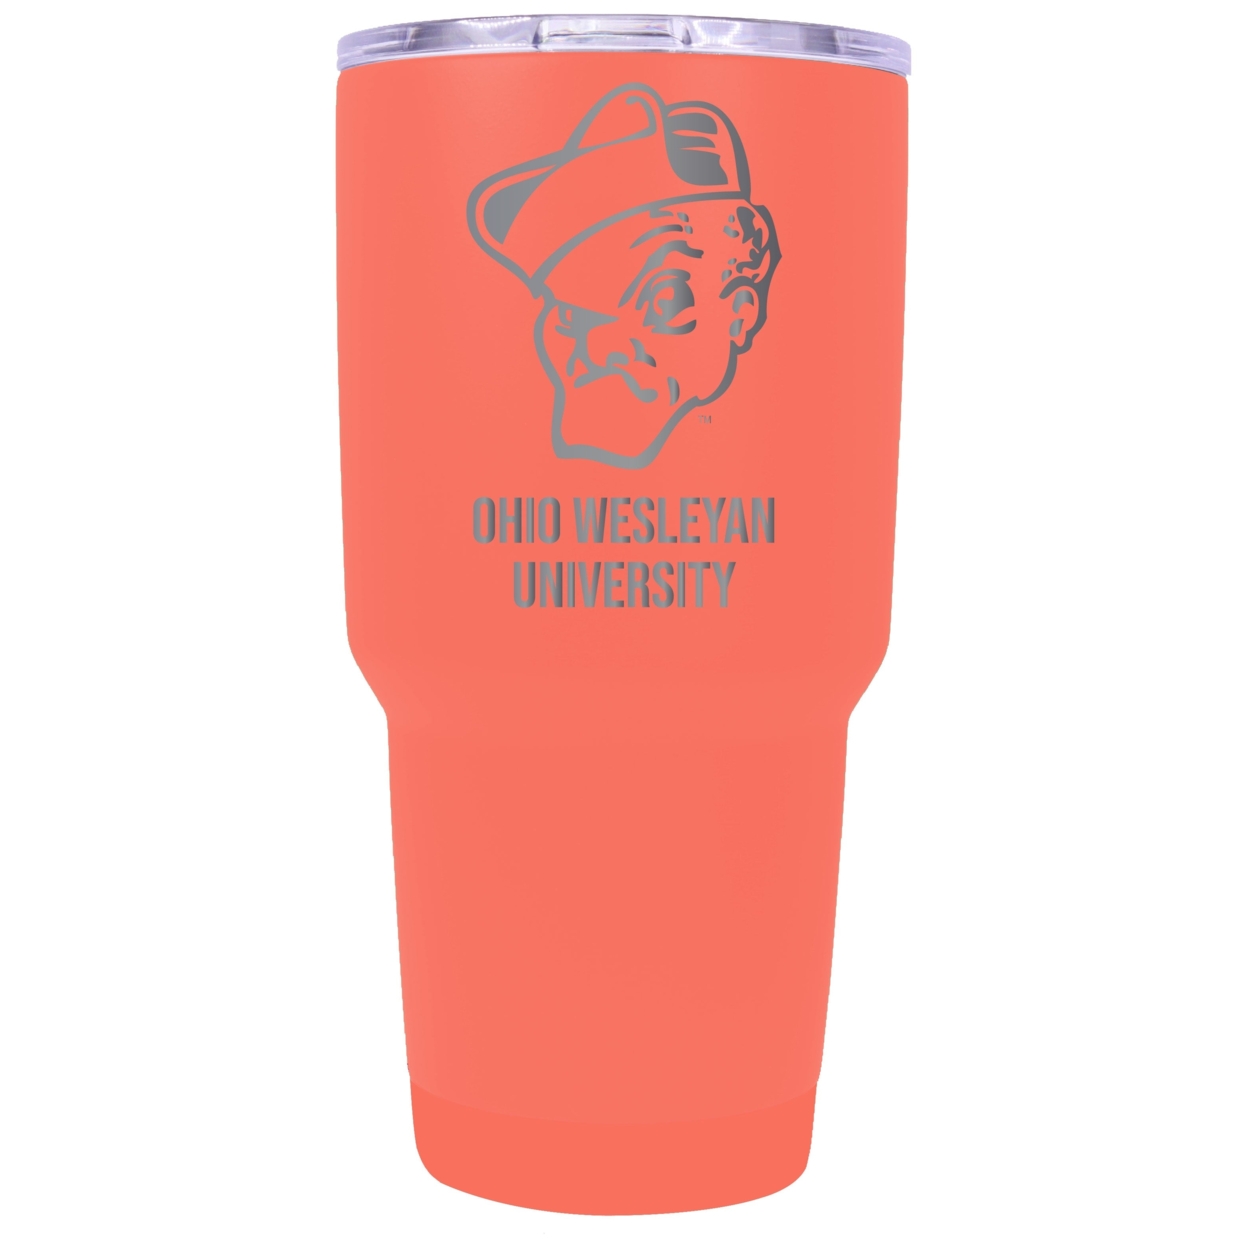 Ohio Wesleyan University 24 Oz Laser Engraved Stainless Steel Insulated Tumbler - Choose Your Color. - Seafoam